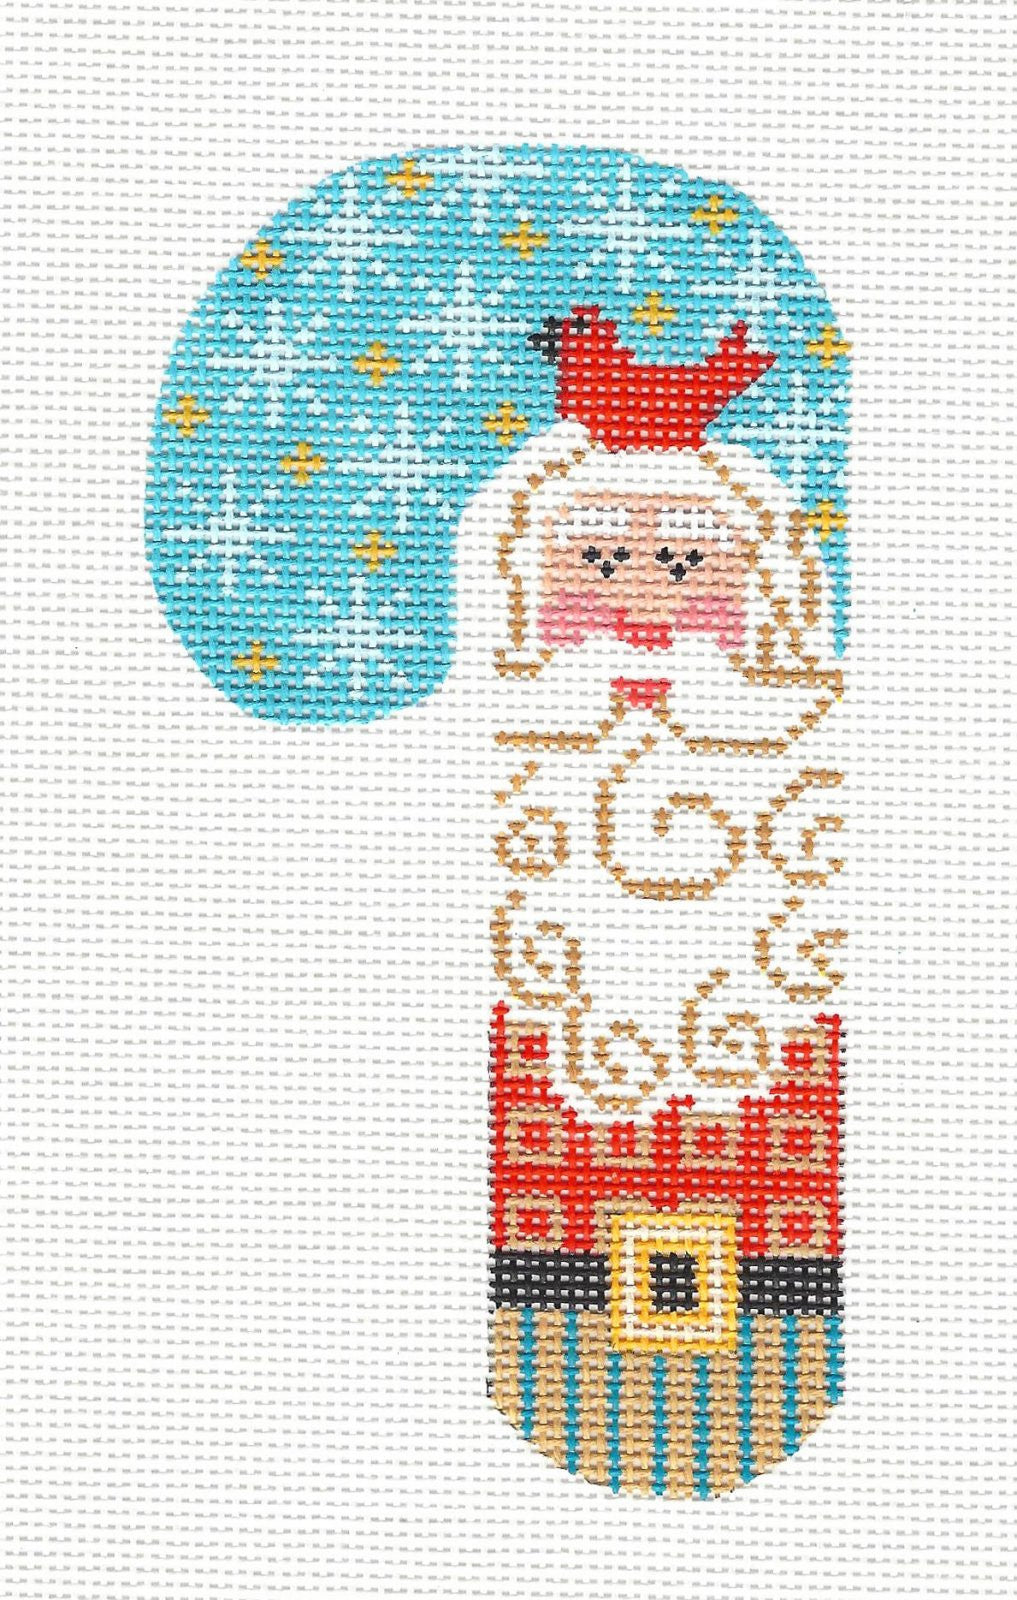 Medium Candy Cane ~ Santa With Cardinal Ornament on hand painted Needlepoint Canvas from Danji Designs